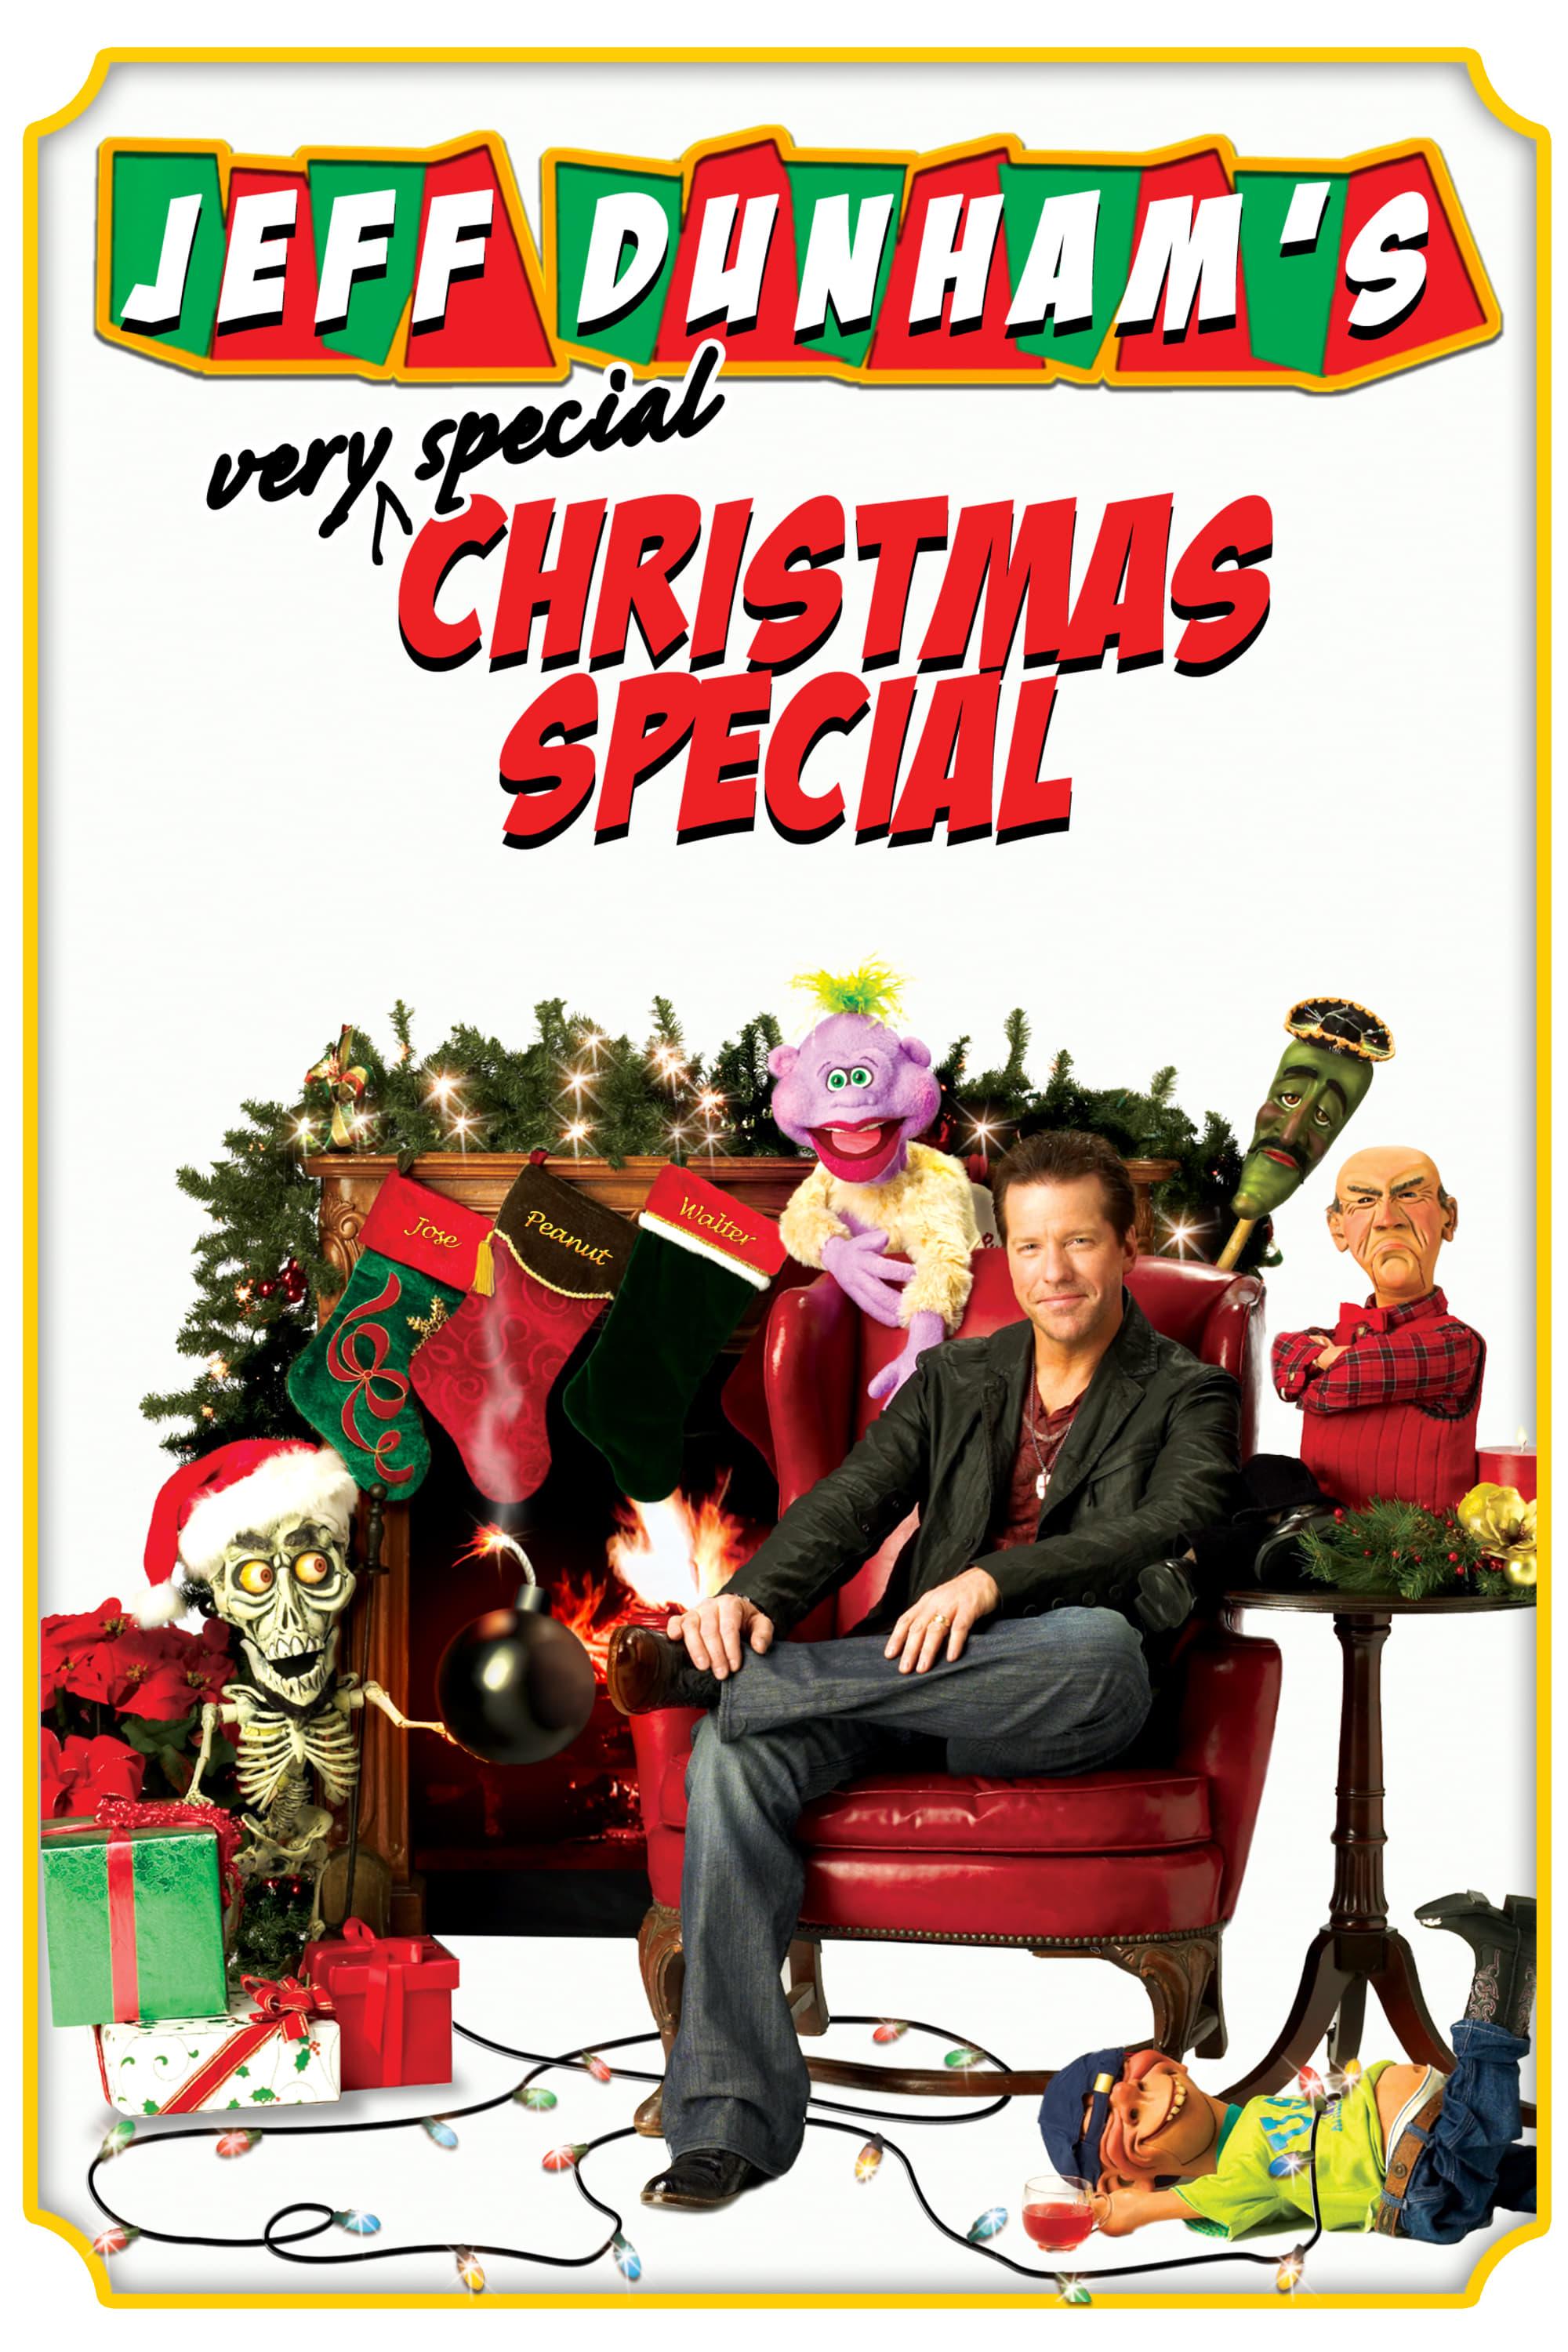 Jeff Dunham's Very Special Christmas Special poster